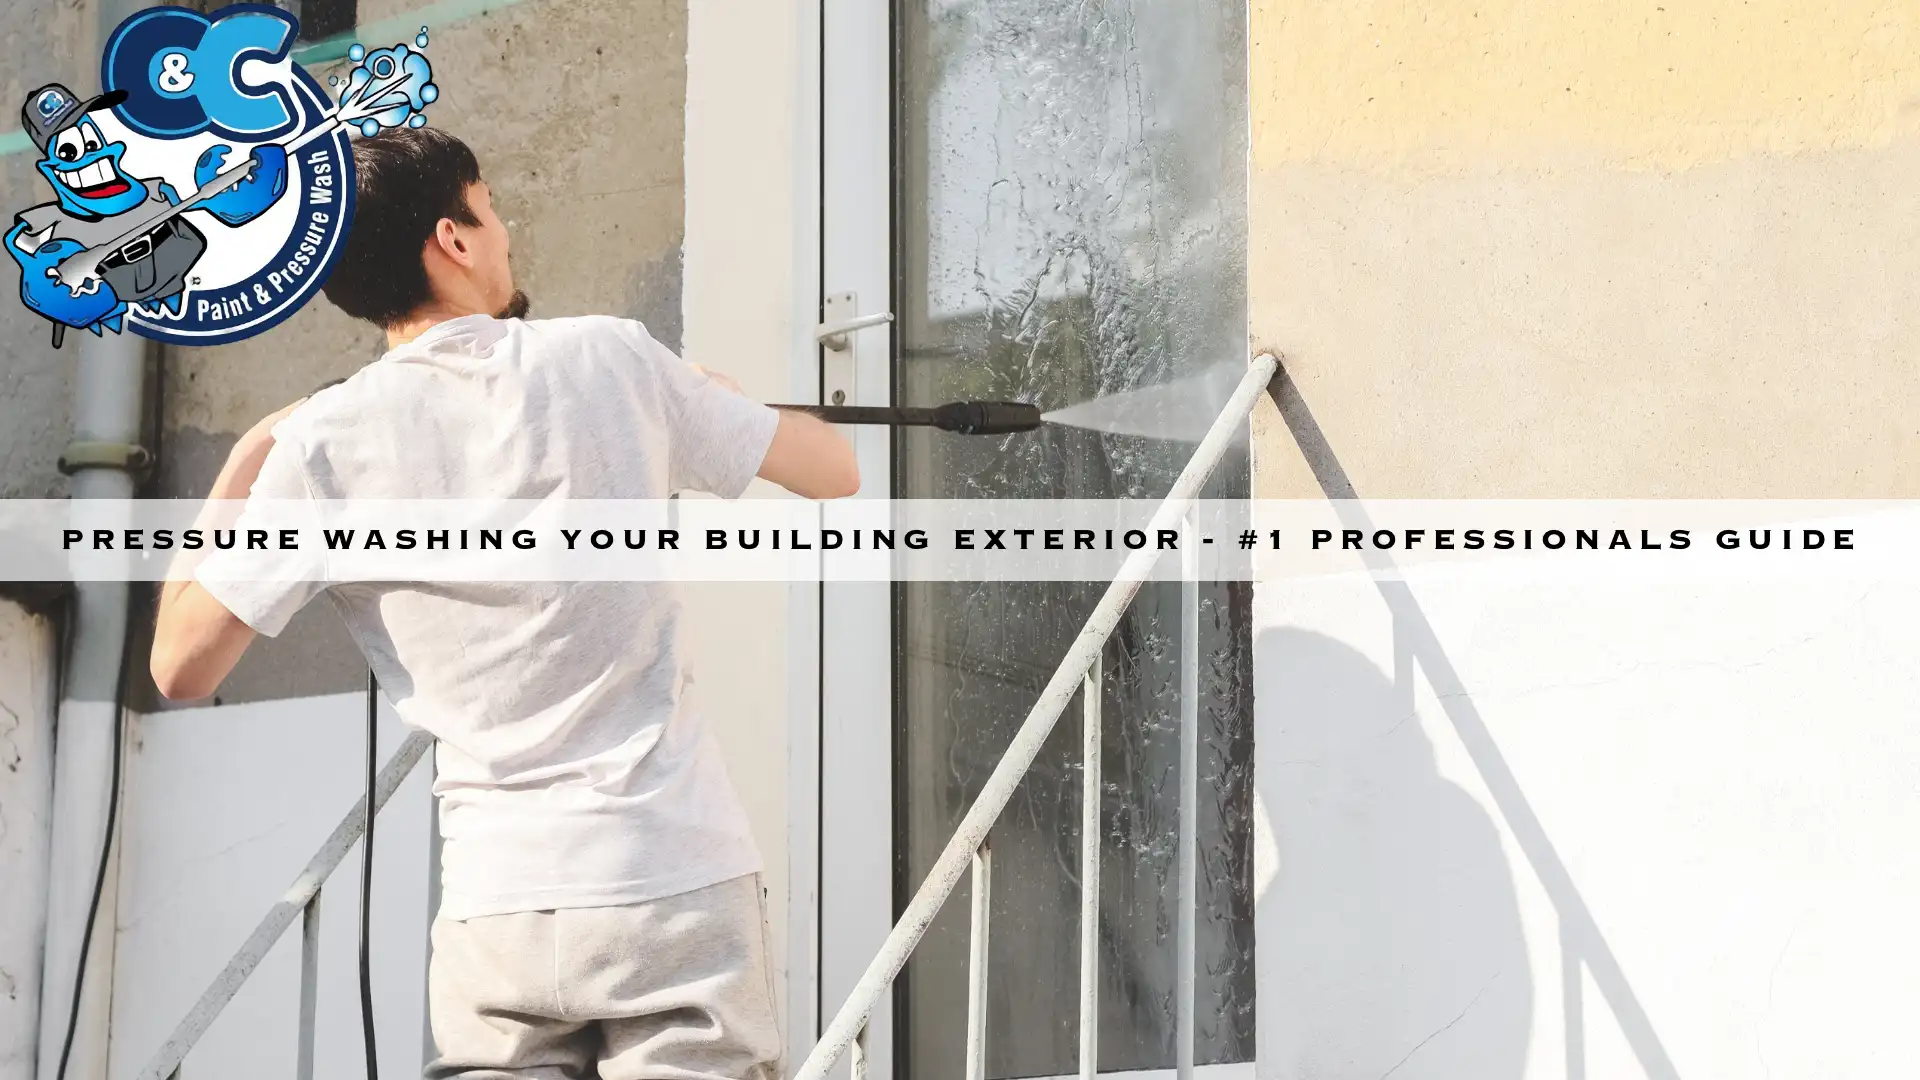 Pressure Washing Your Building Exterior - #1 Professionals Guide